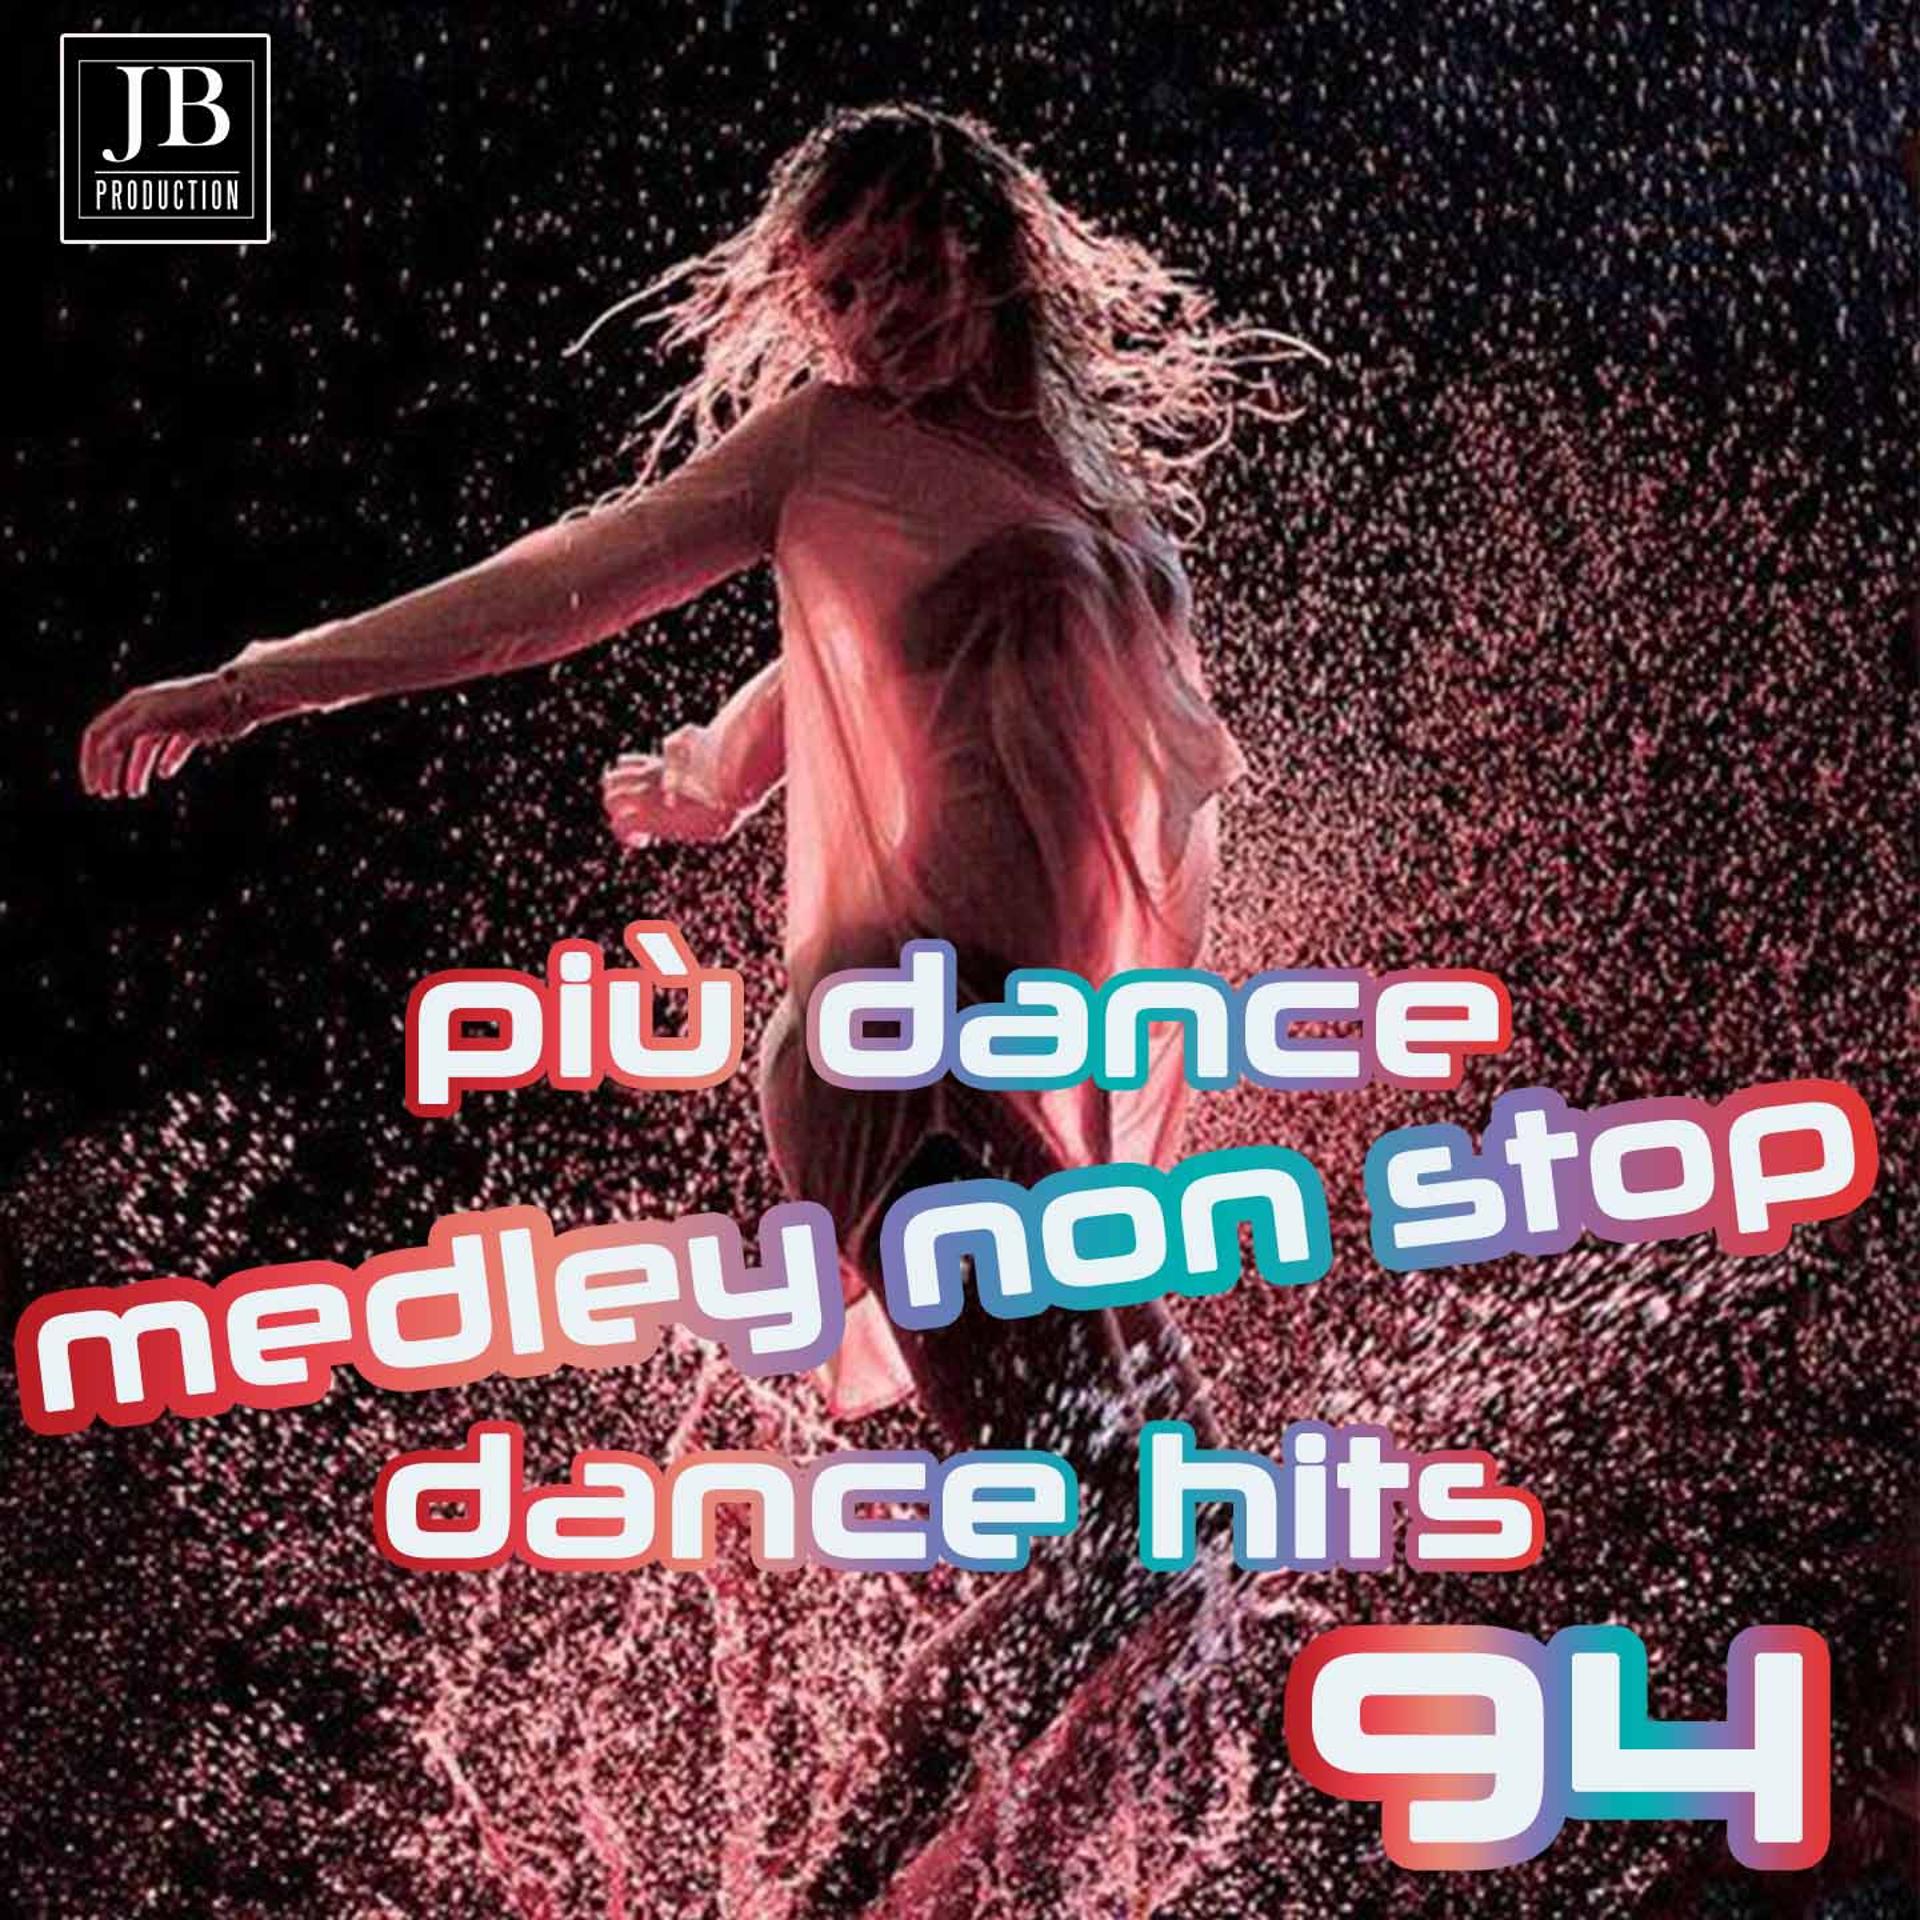 Постер альбома Medley Non Stop Più Dance Hits 94 Megamix: Never Alone / Sonata / Chiquetere / I Can See Clearly Now / Toccata E Fuga / Locomotive Vocale / Michelle / Cornflake Girl / The Most Beautiful Girl in the World / Water Fall / Smalltown Boy / The Winner Takes I